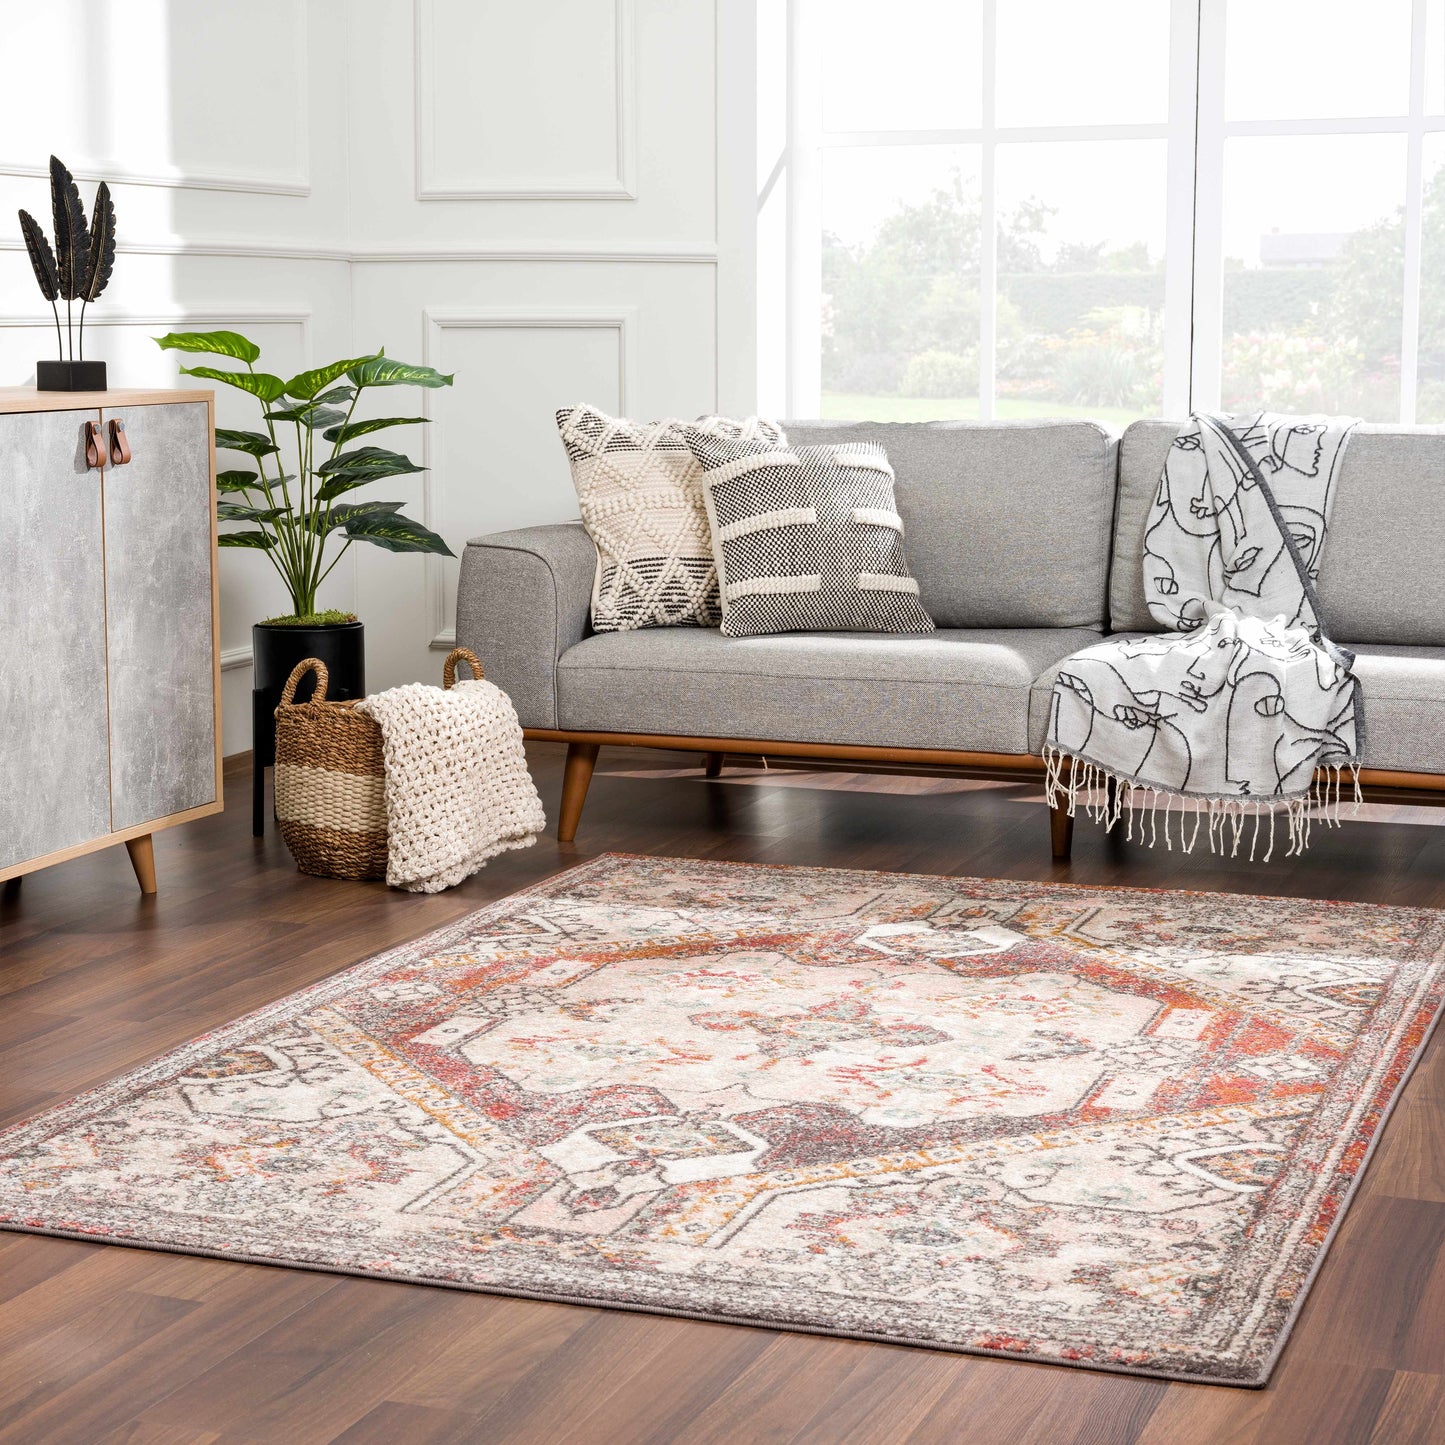 Yennora Area Rug - Clearance